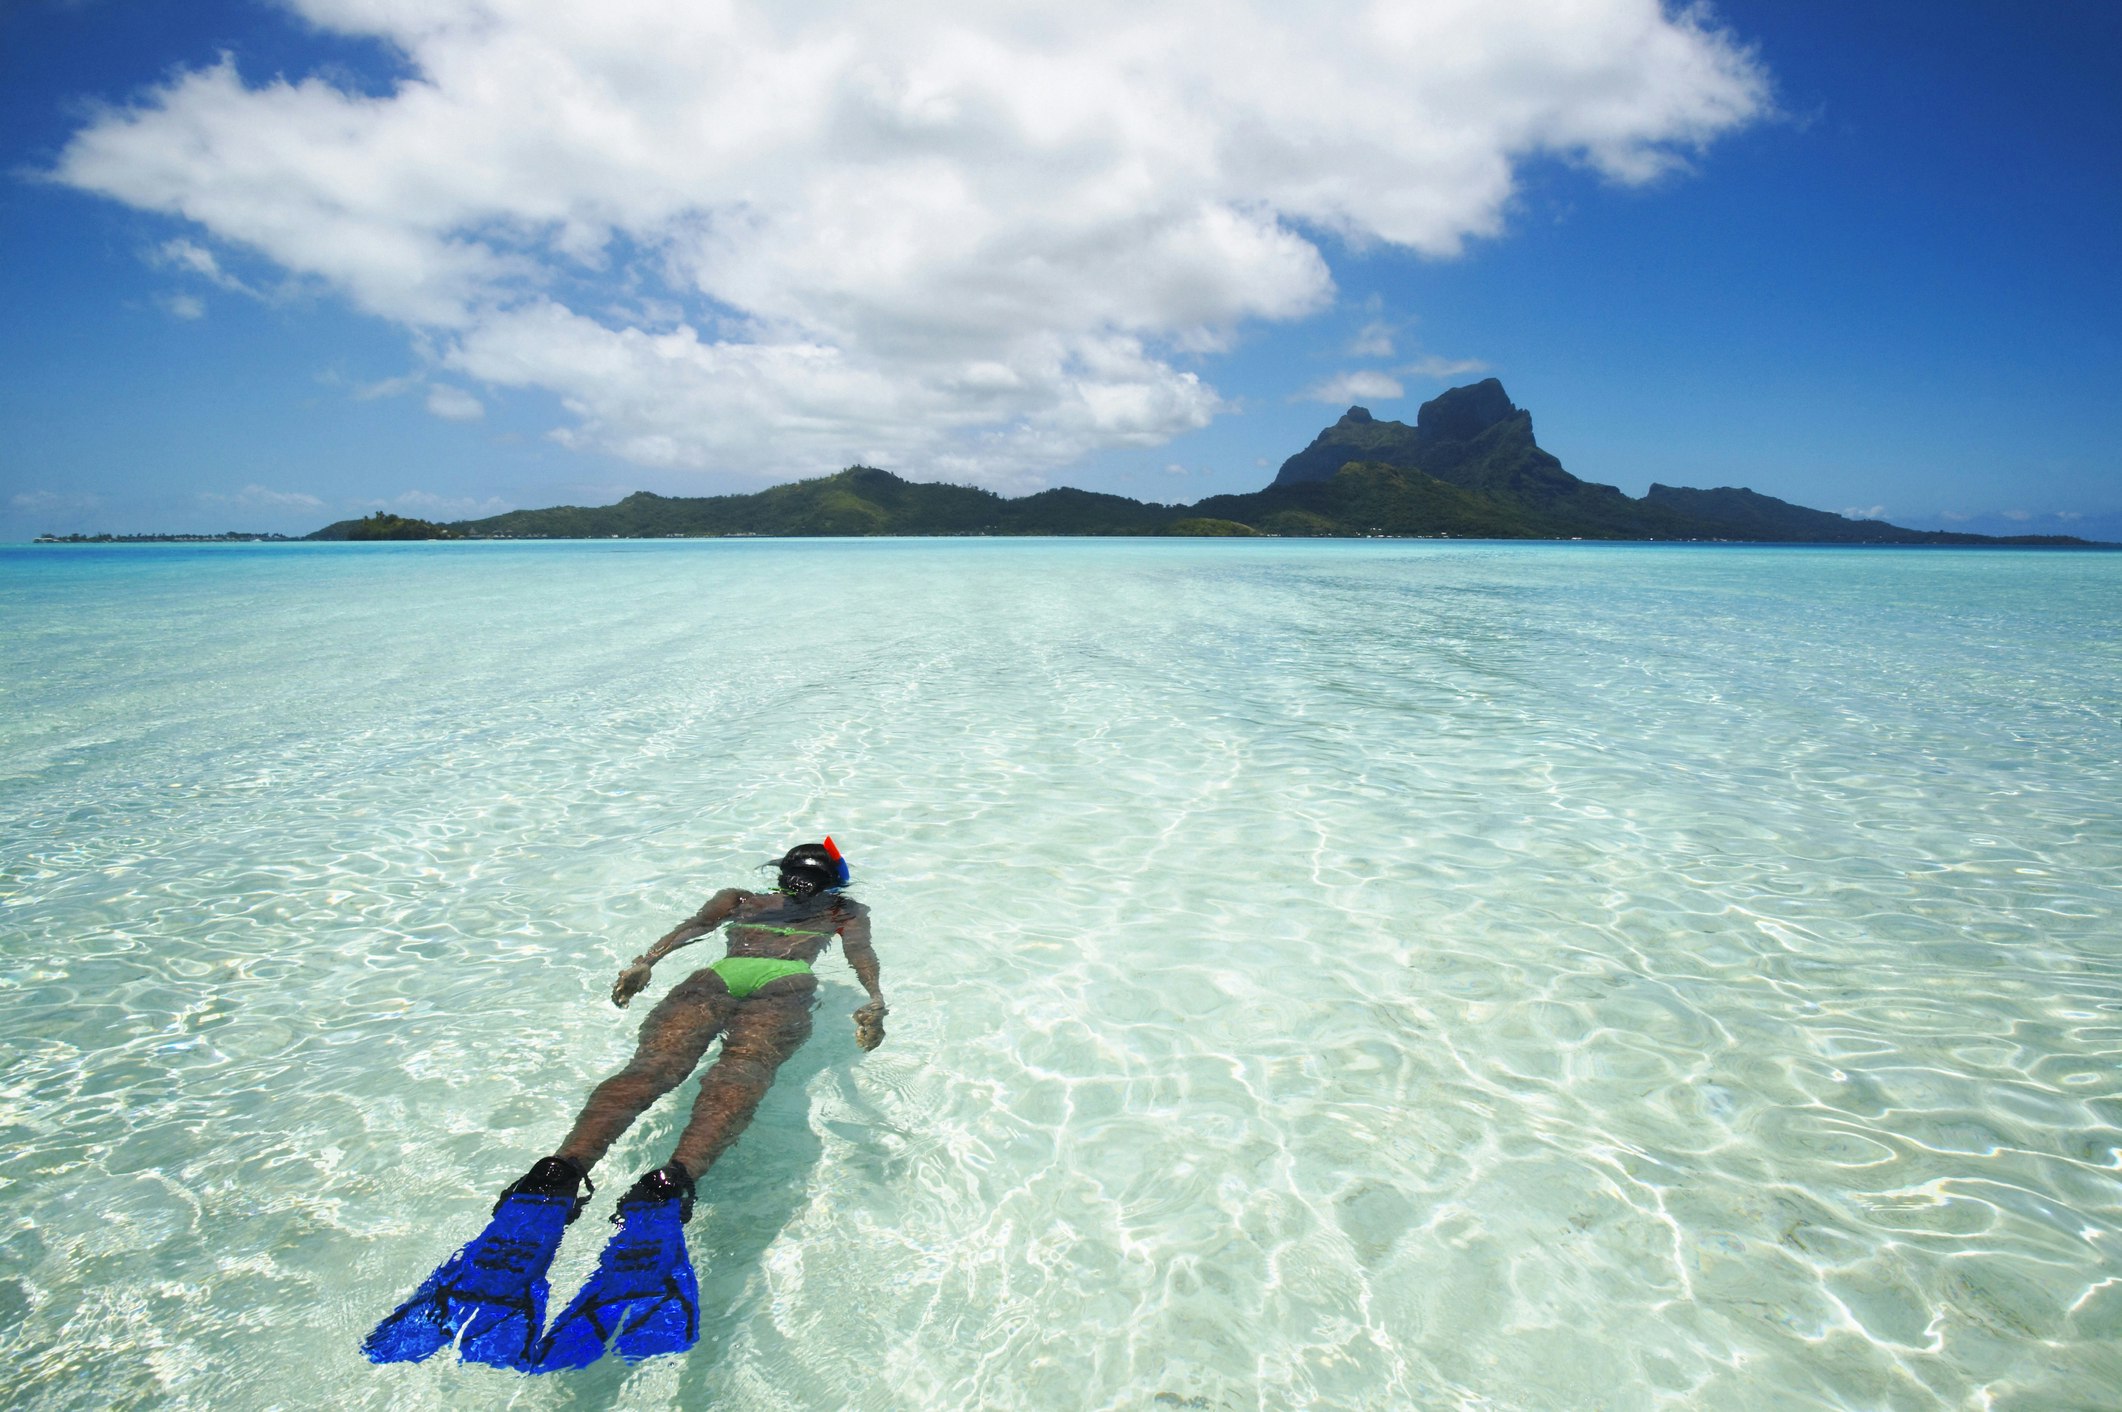 A woman is snorkelling in shallow water with Mt Otemanu in the background